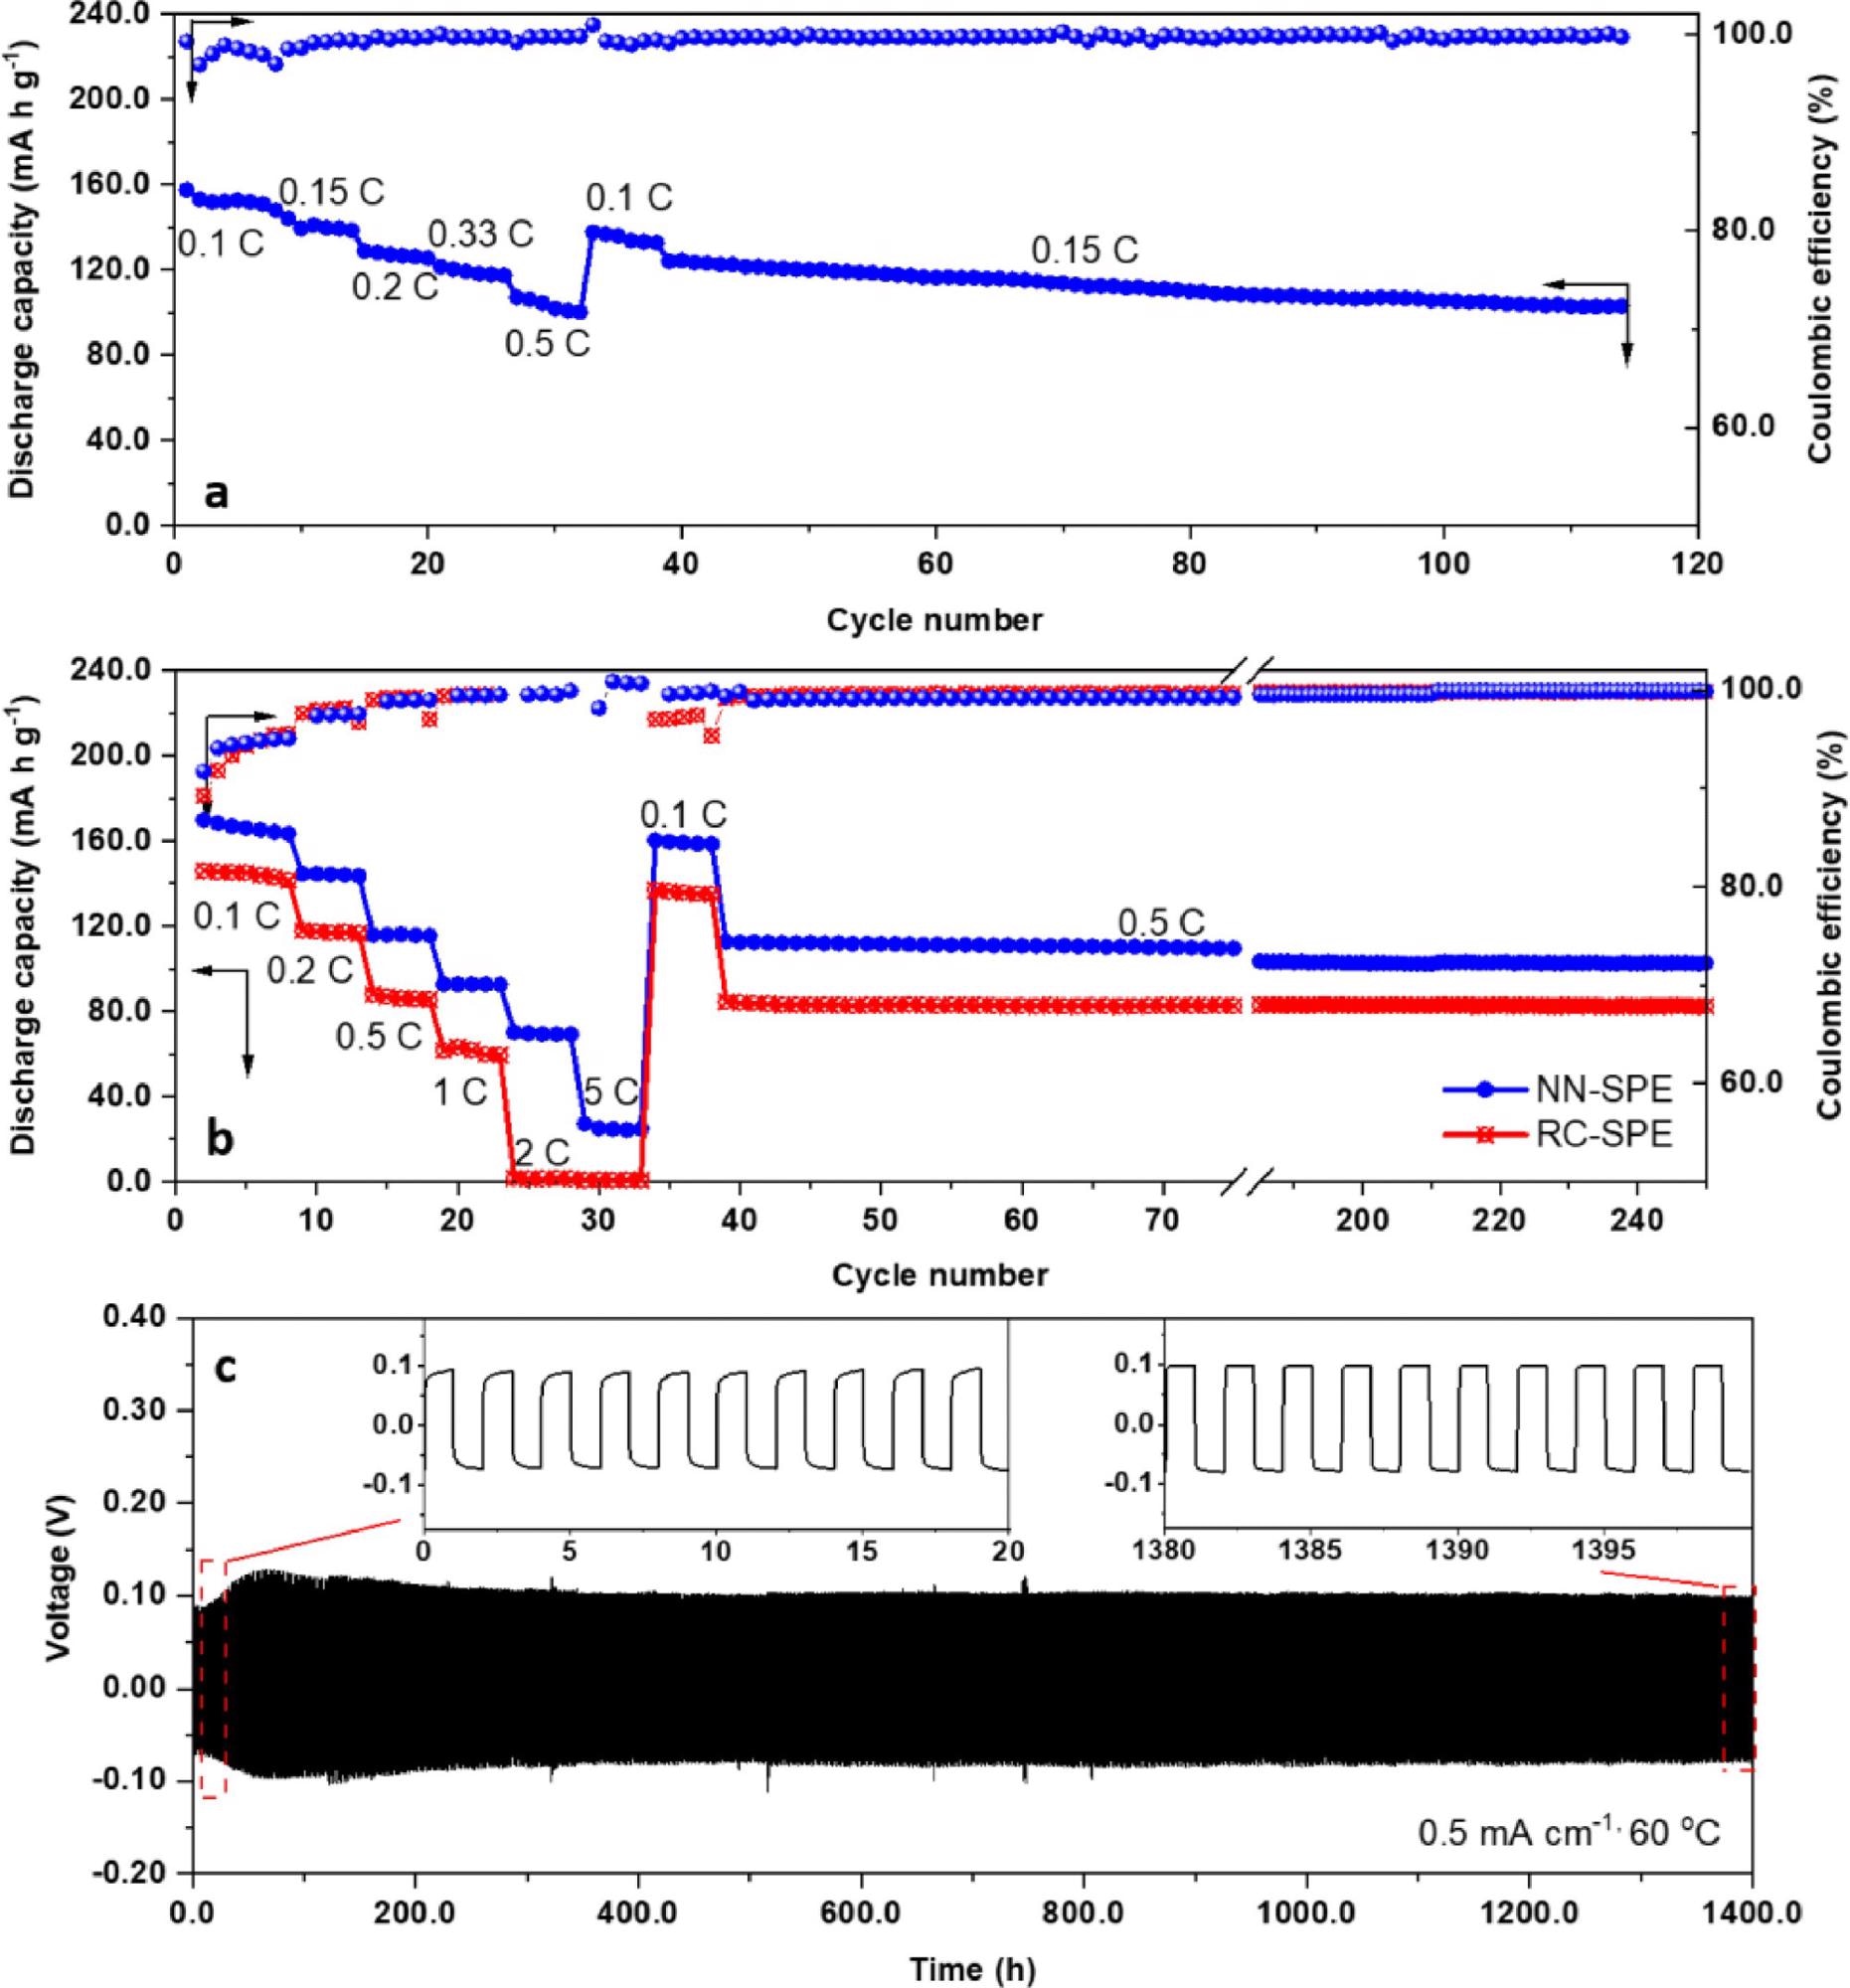 Lithium metal battery performance. (a) Rate and cycling performance of NN-SPE at 30 °C. (b) Rate and cycling performance of NN-SPE at 60 °C. (c) Performance of symmetric lithium cells (NN-SPE) at 0.5 mA cm-1 and 60 °C.